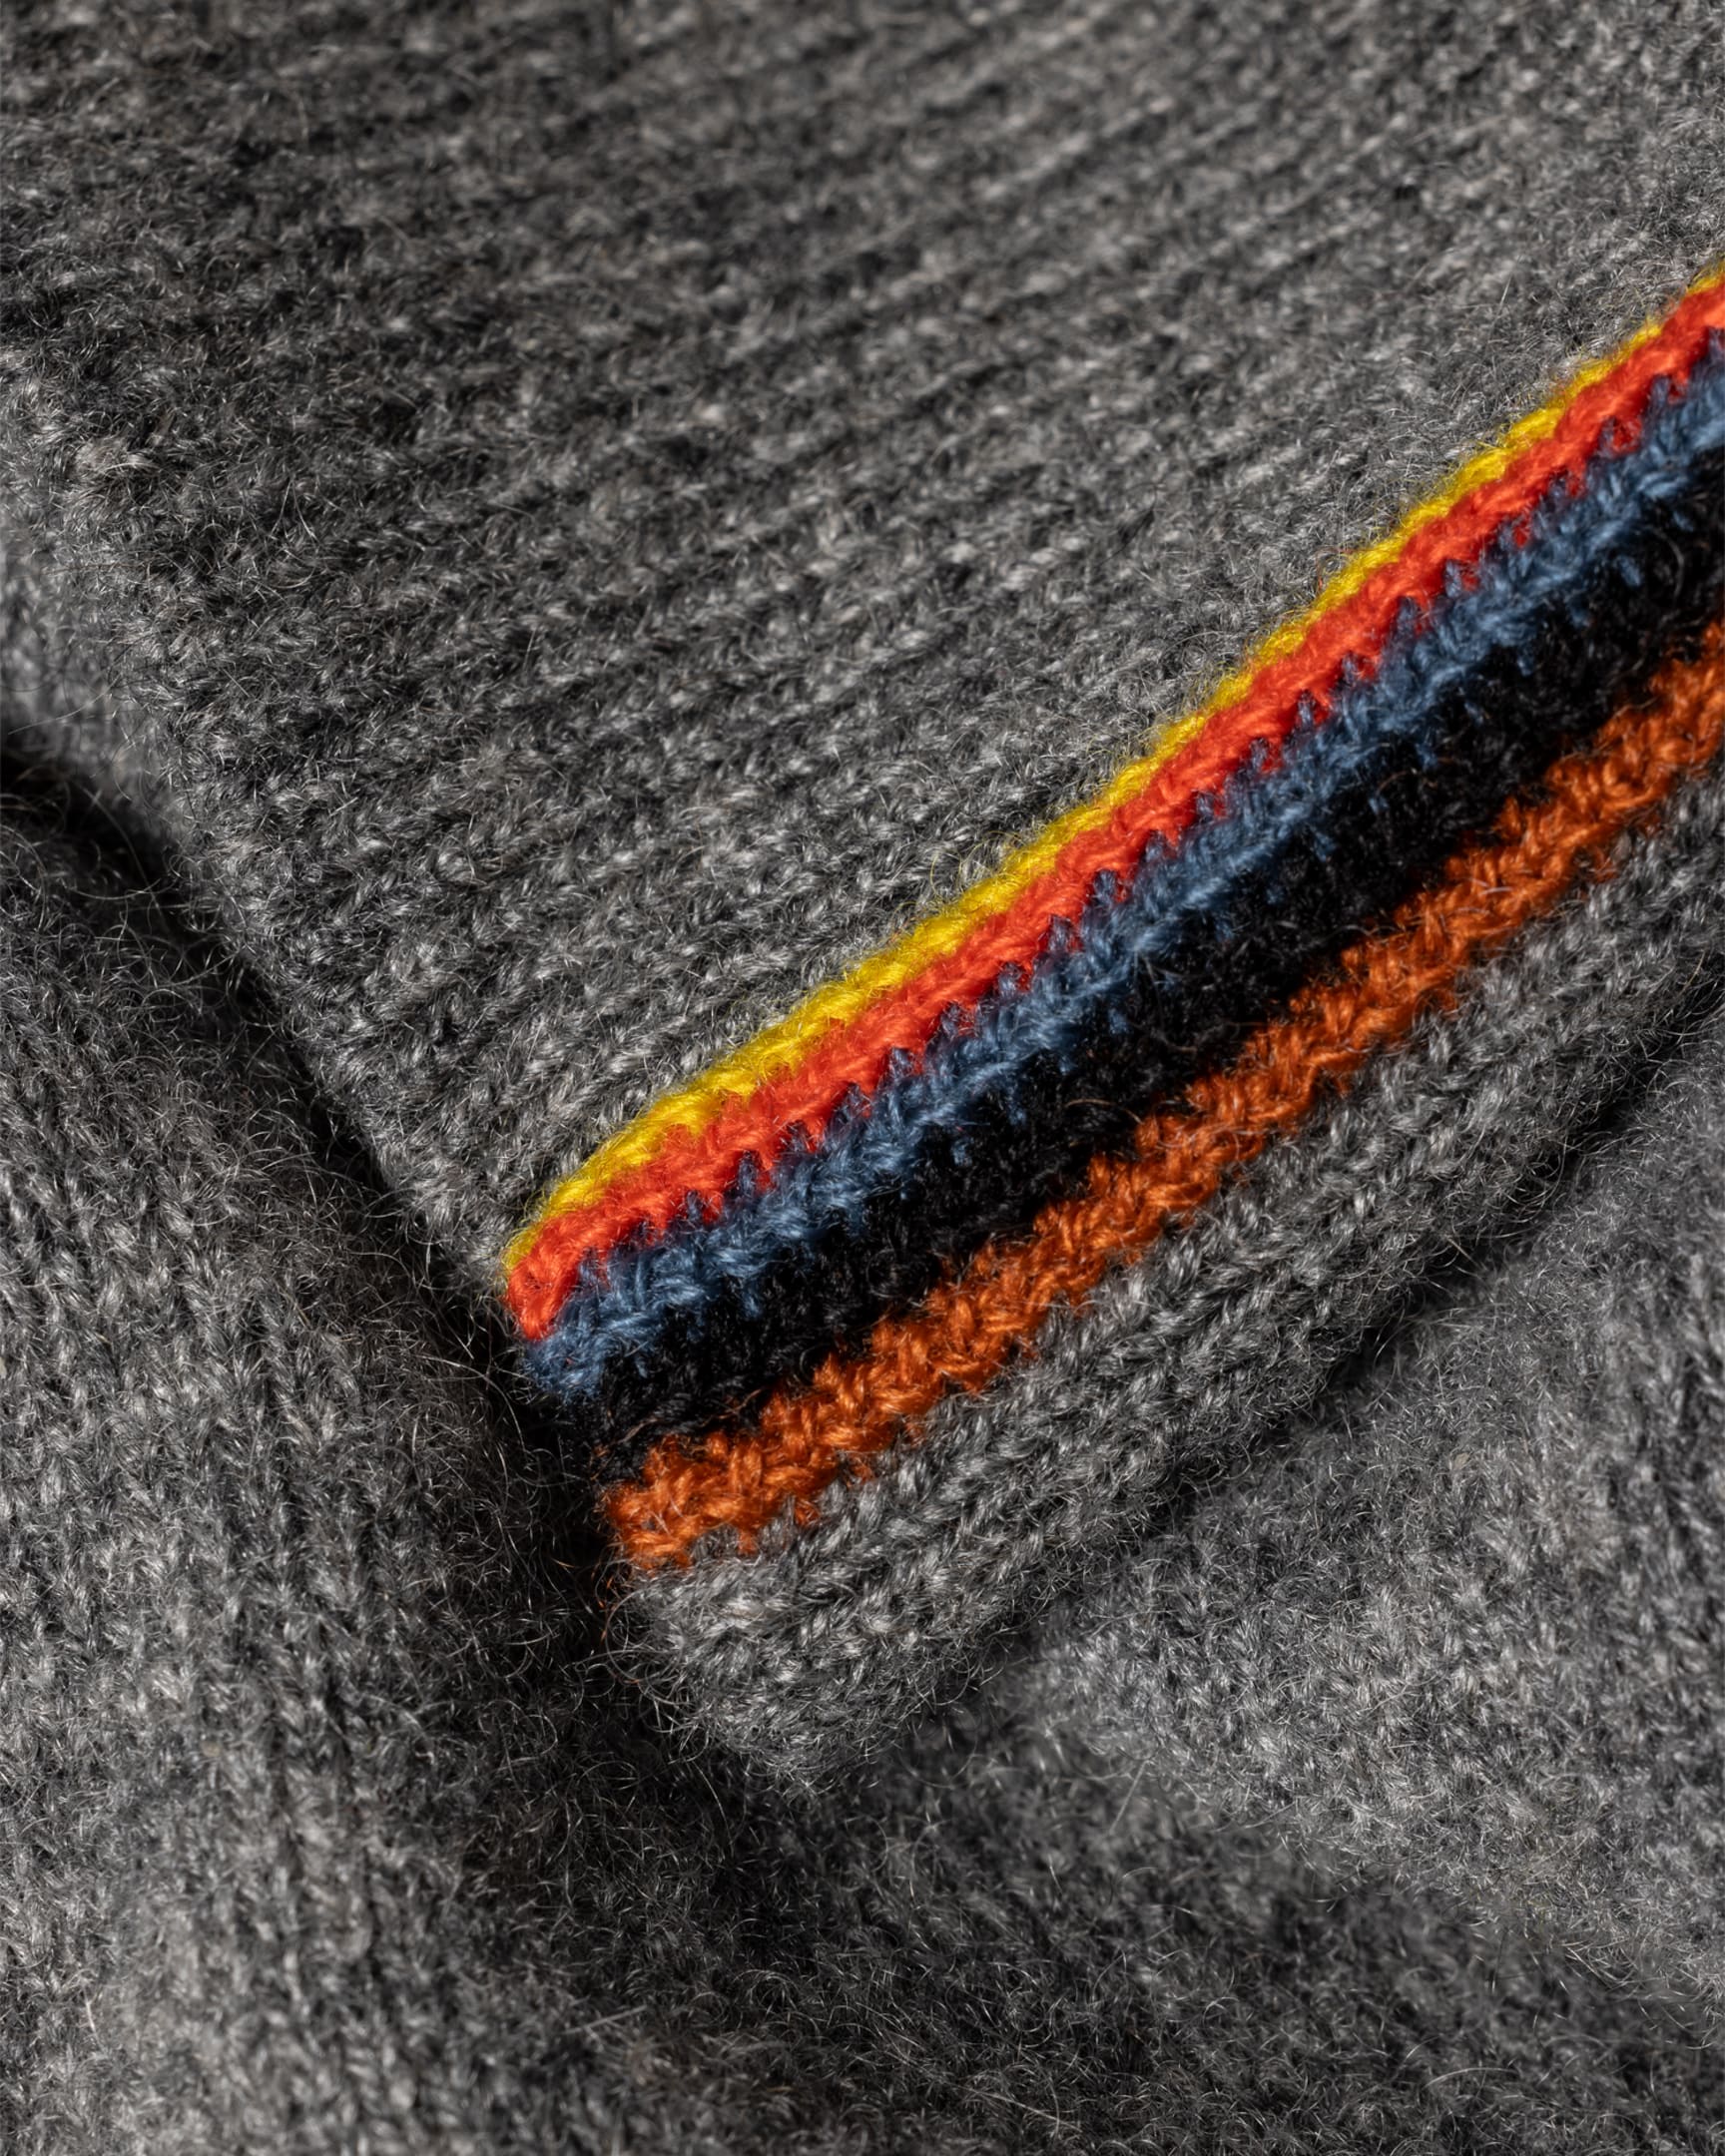 Detail View - Grey Cashmere 'Artist Stripe' Roll Neck Sweater Paul Smith